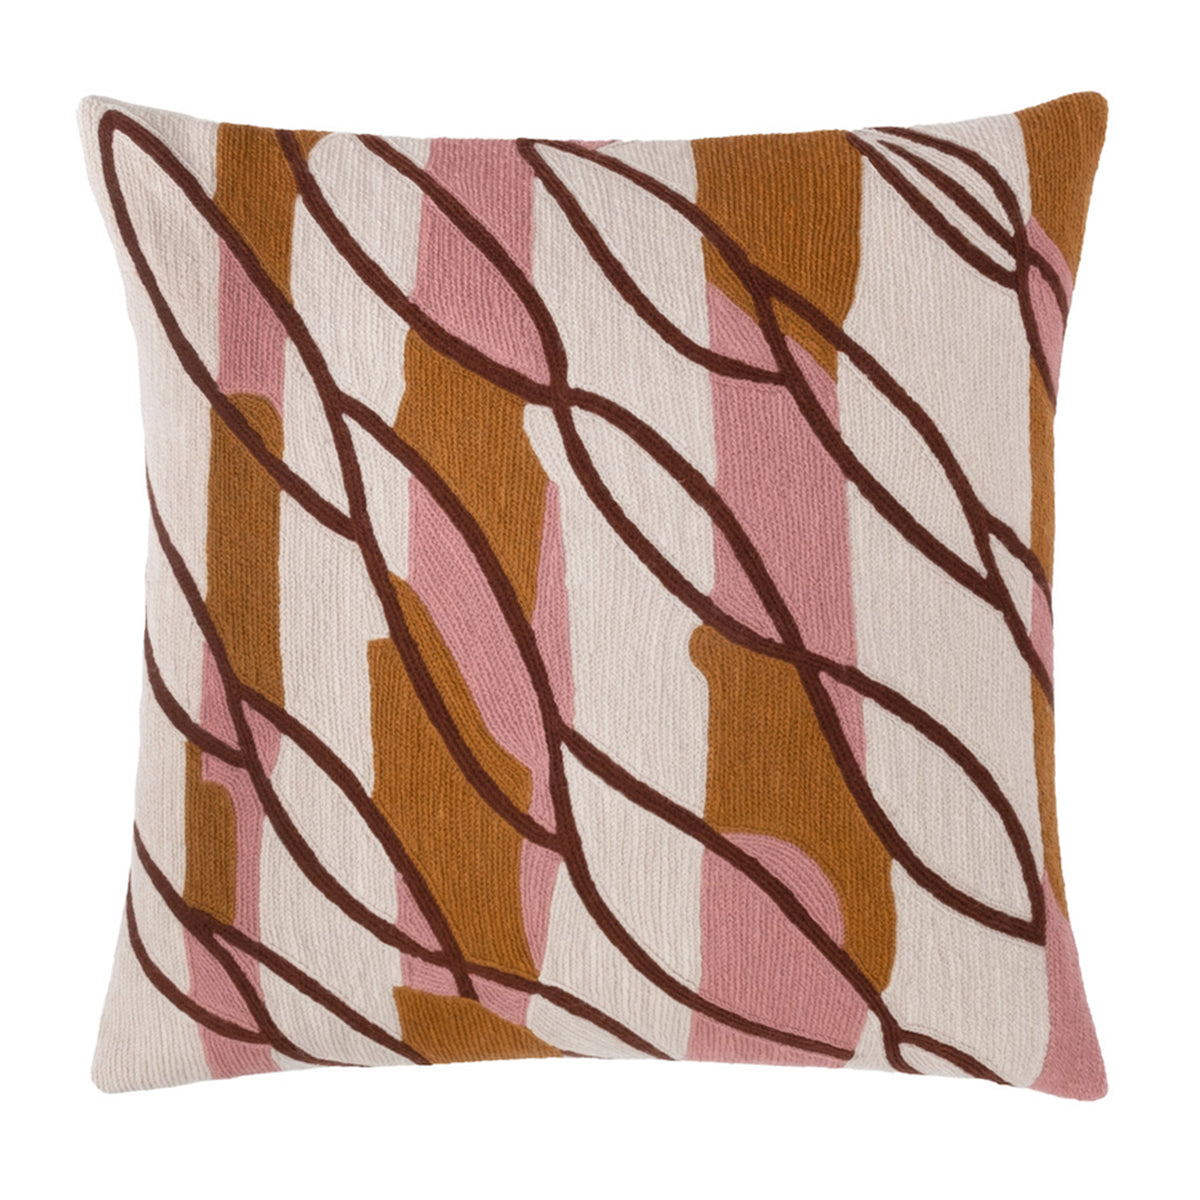 Judy Ross Passage 18" Embroidered Pillow - Oyster/Dusty Pink/Amber/Sierra